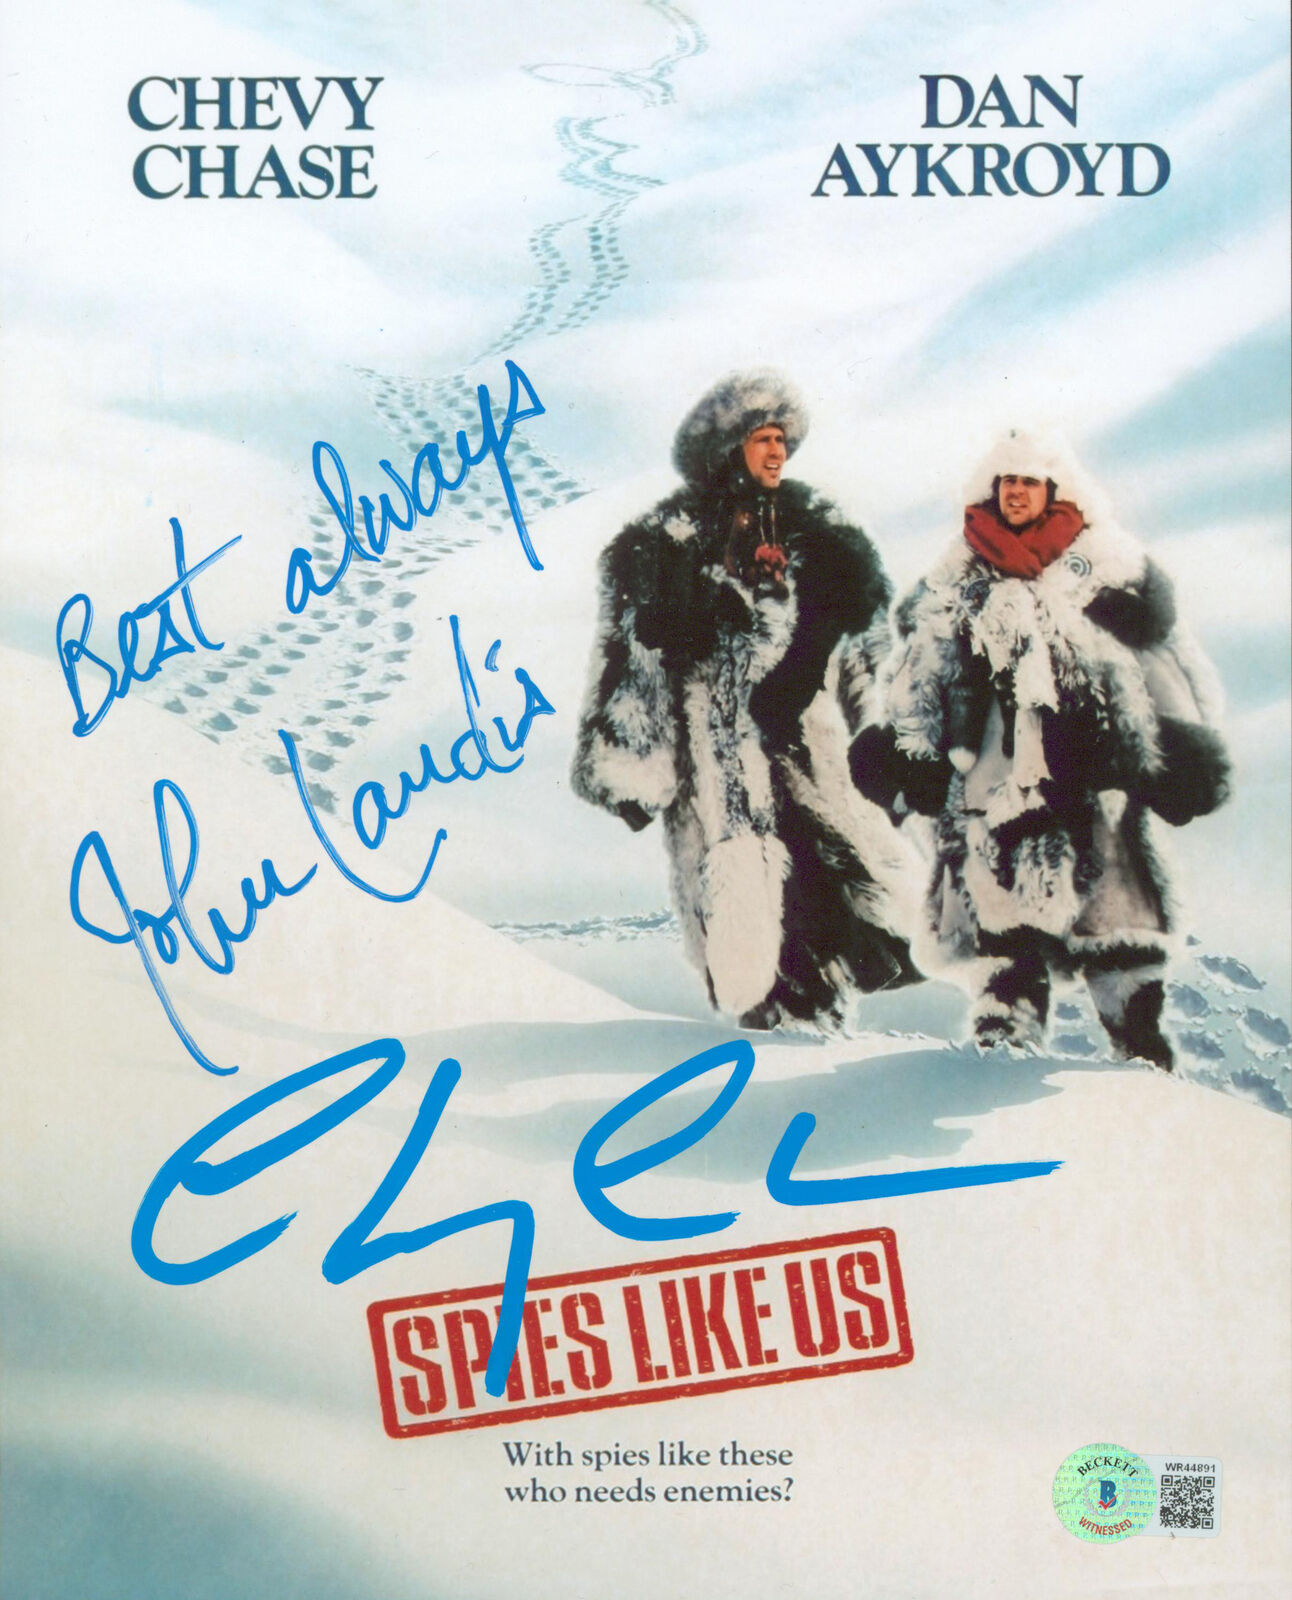 Chevy Chase & John Landis Spies Like Us Authentic Signed 8x10 Photo Poster painting BAS #WR44891